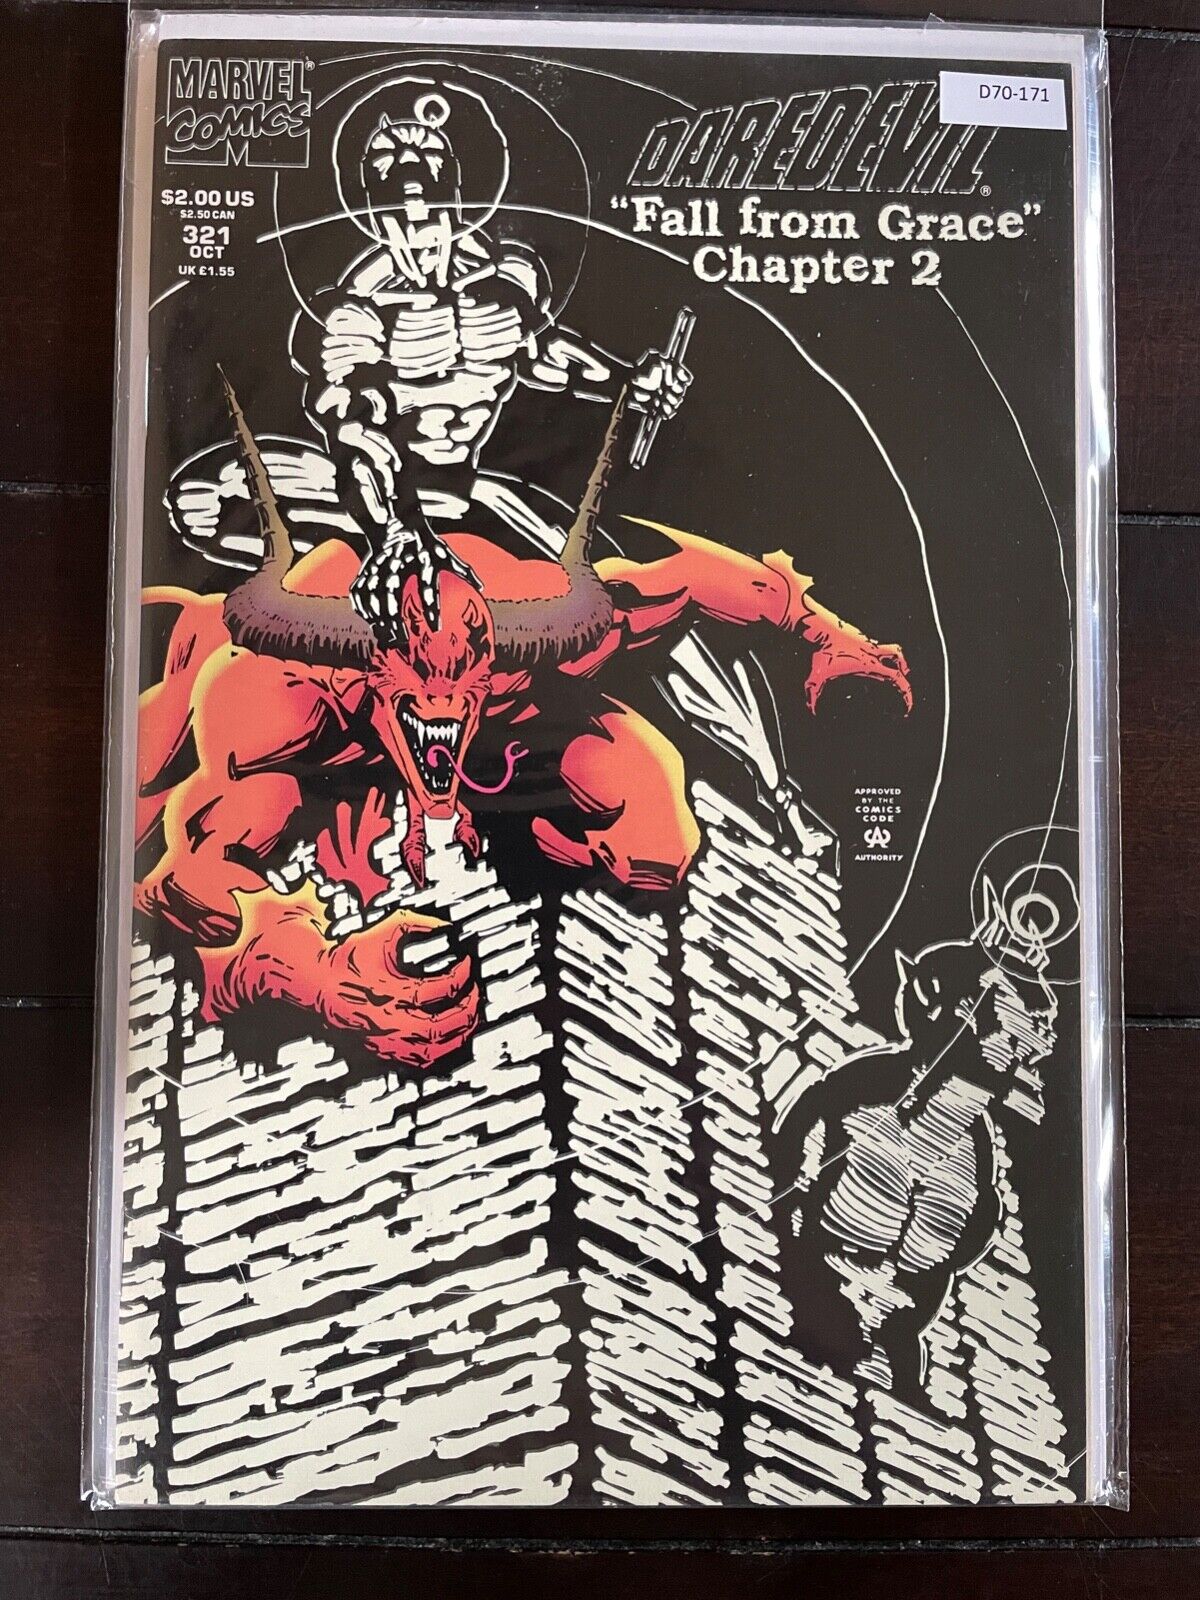 Daredevil Fall from Grace Chapter 2 High Grade 9.2 Marvel Comic Book D70-171